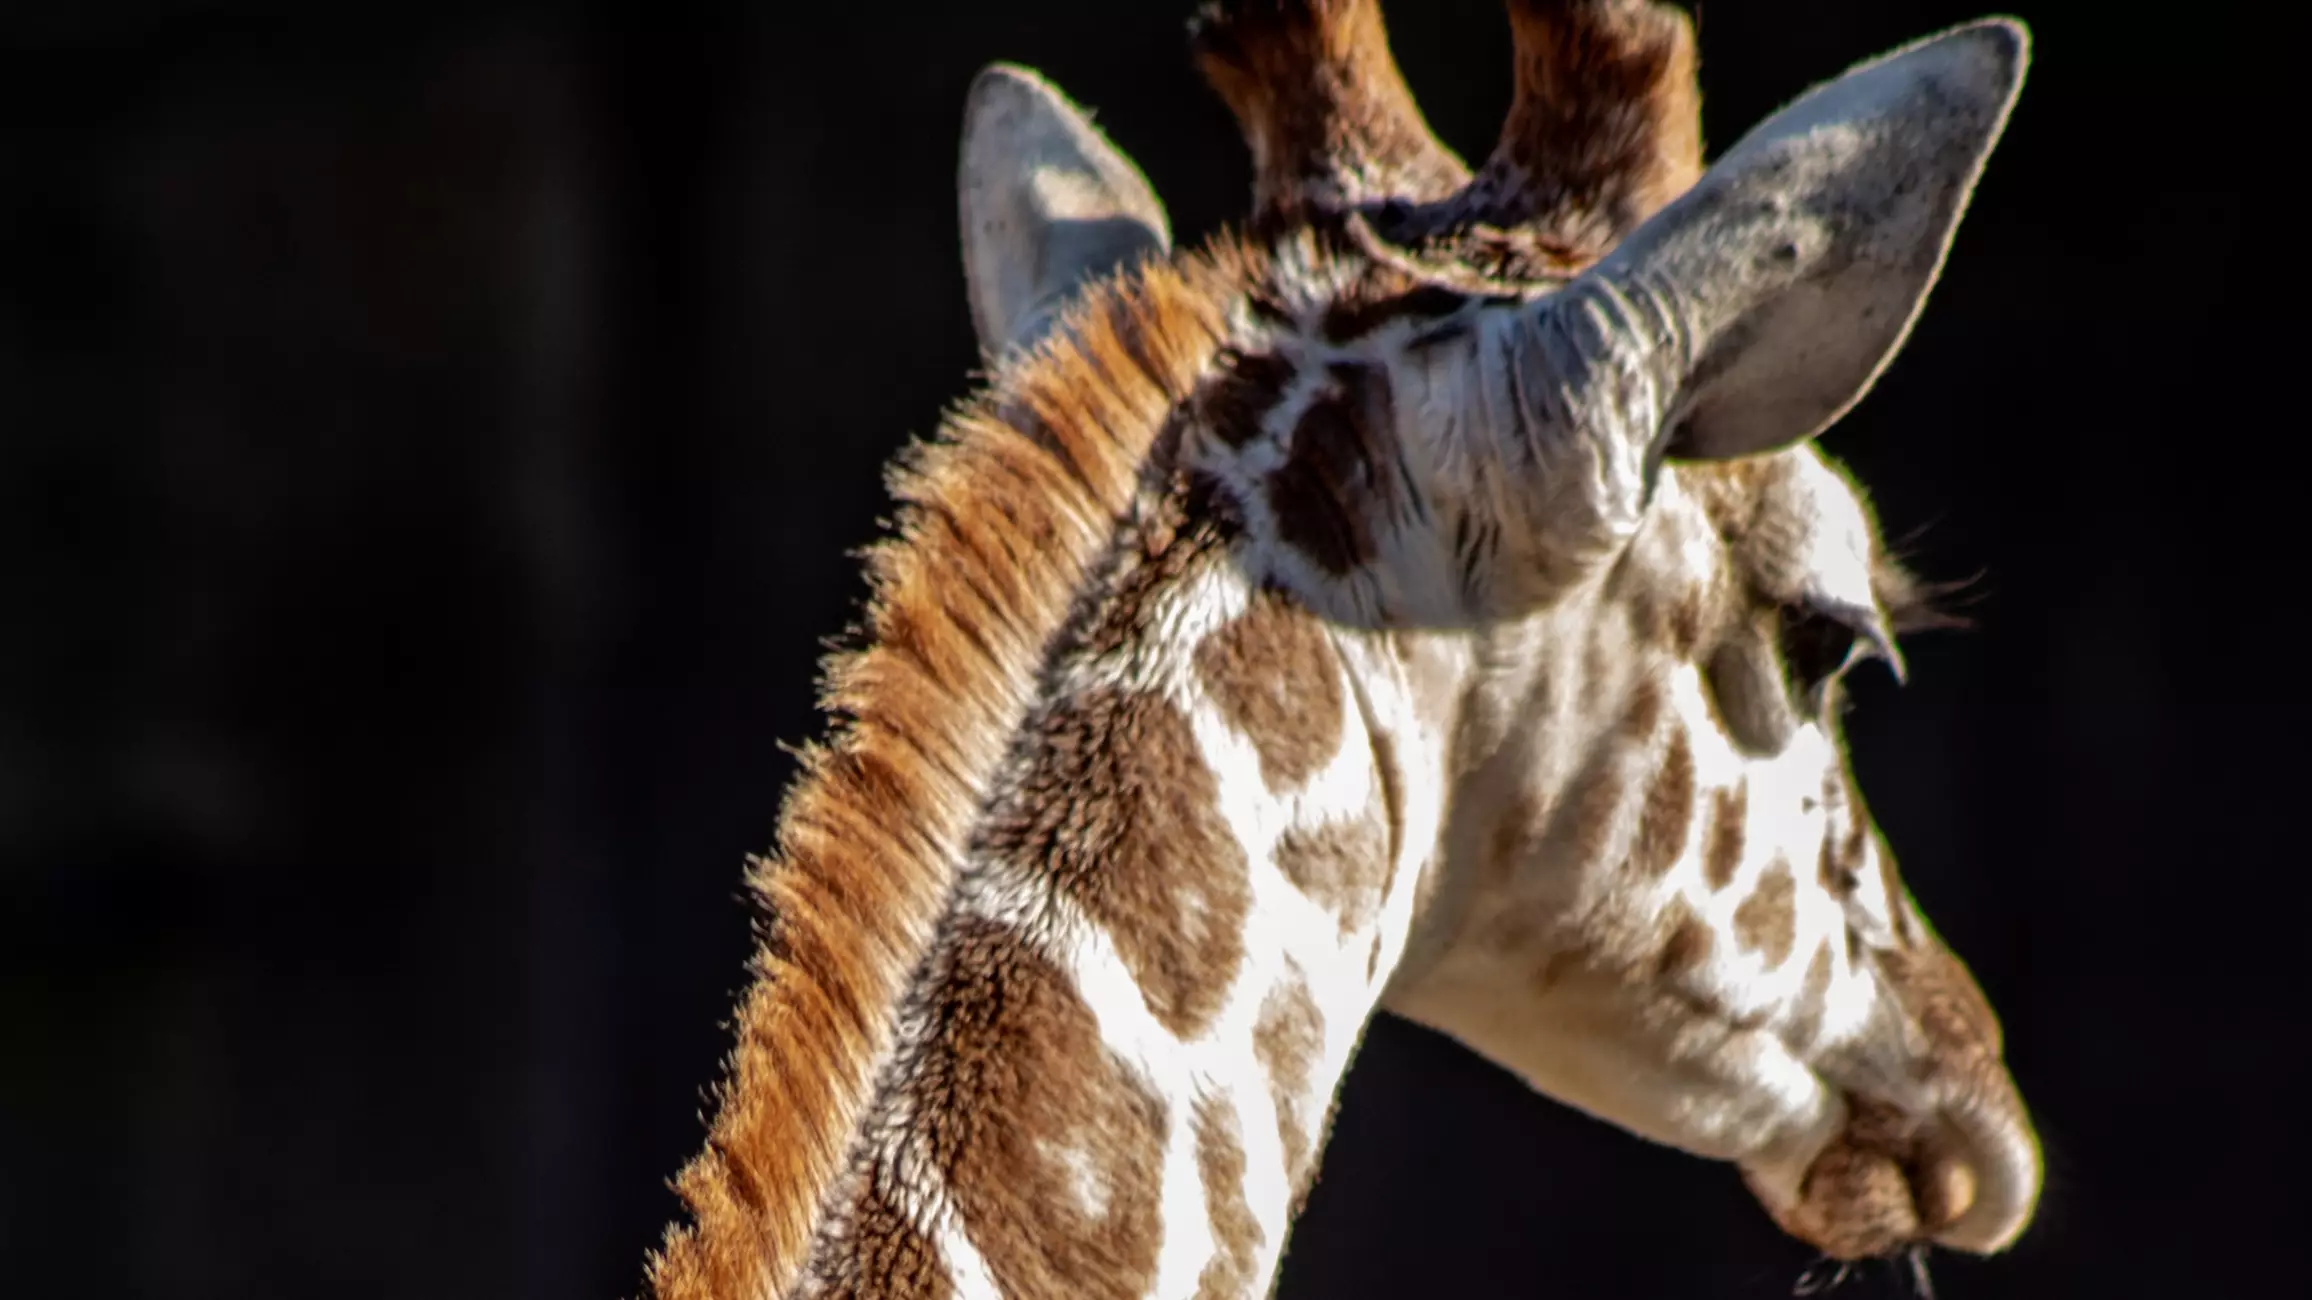 Giraffes Could Soon Be Officially Considered An Endangered Species